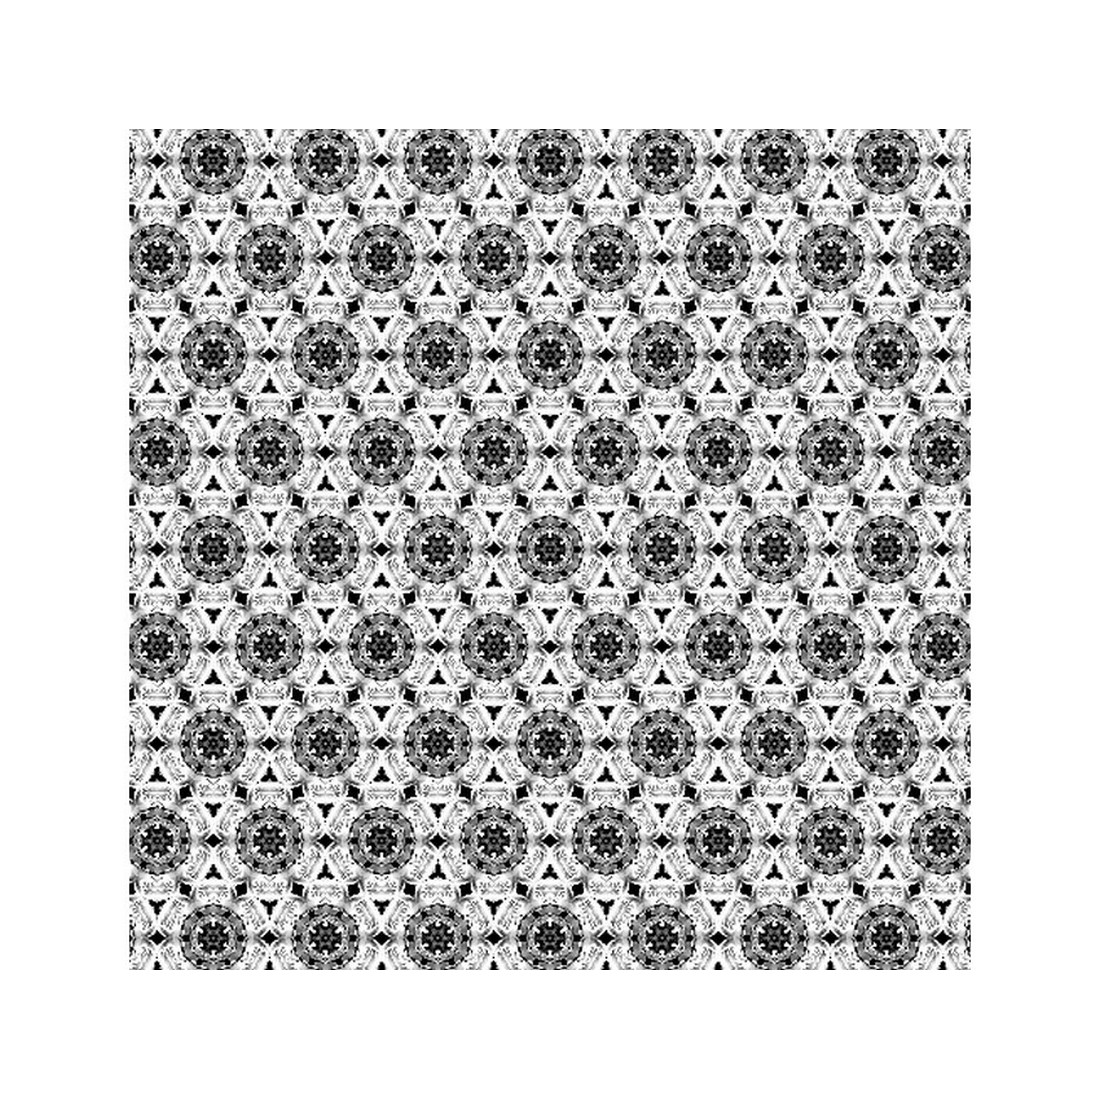 Seamless Surface Tiling Pattern Designs, white with dark lines design.